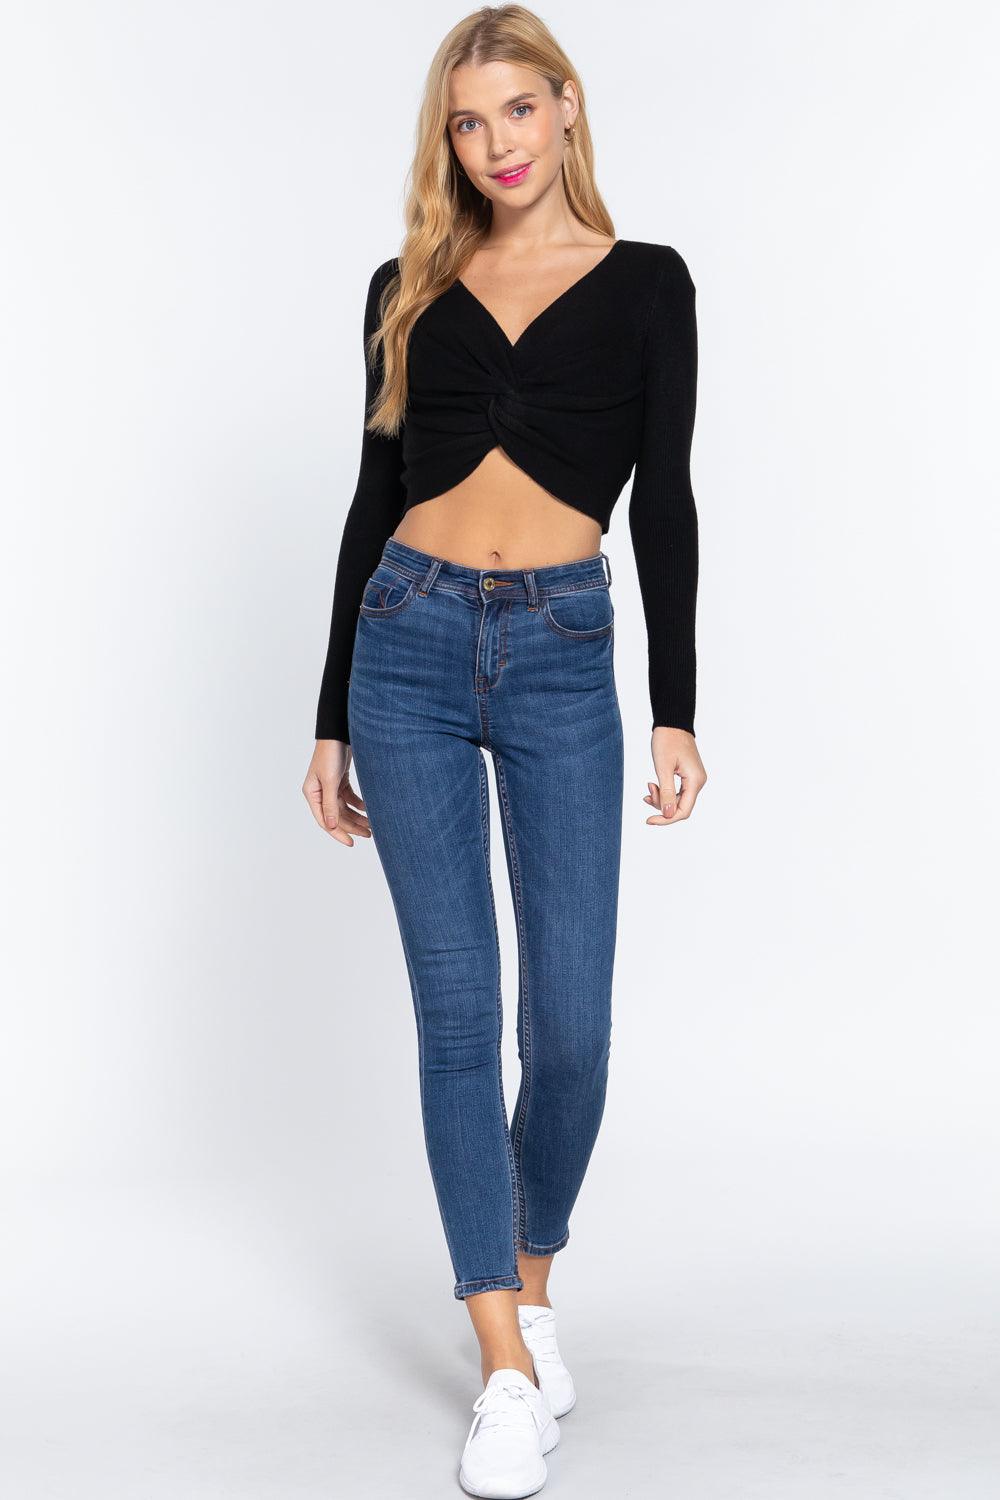 V-neck Front Knotted Crop Sweater Naughty Smile Fashion